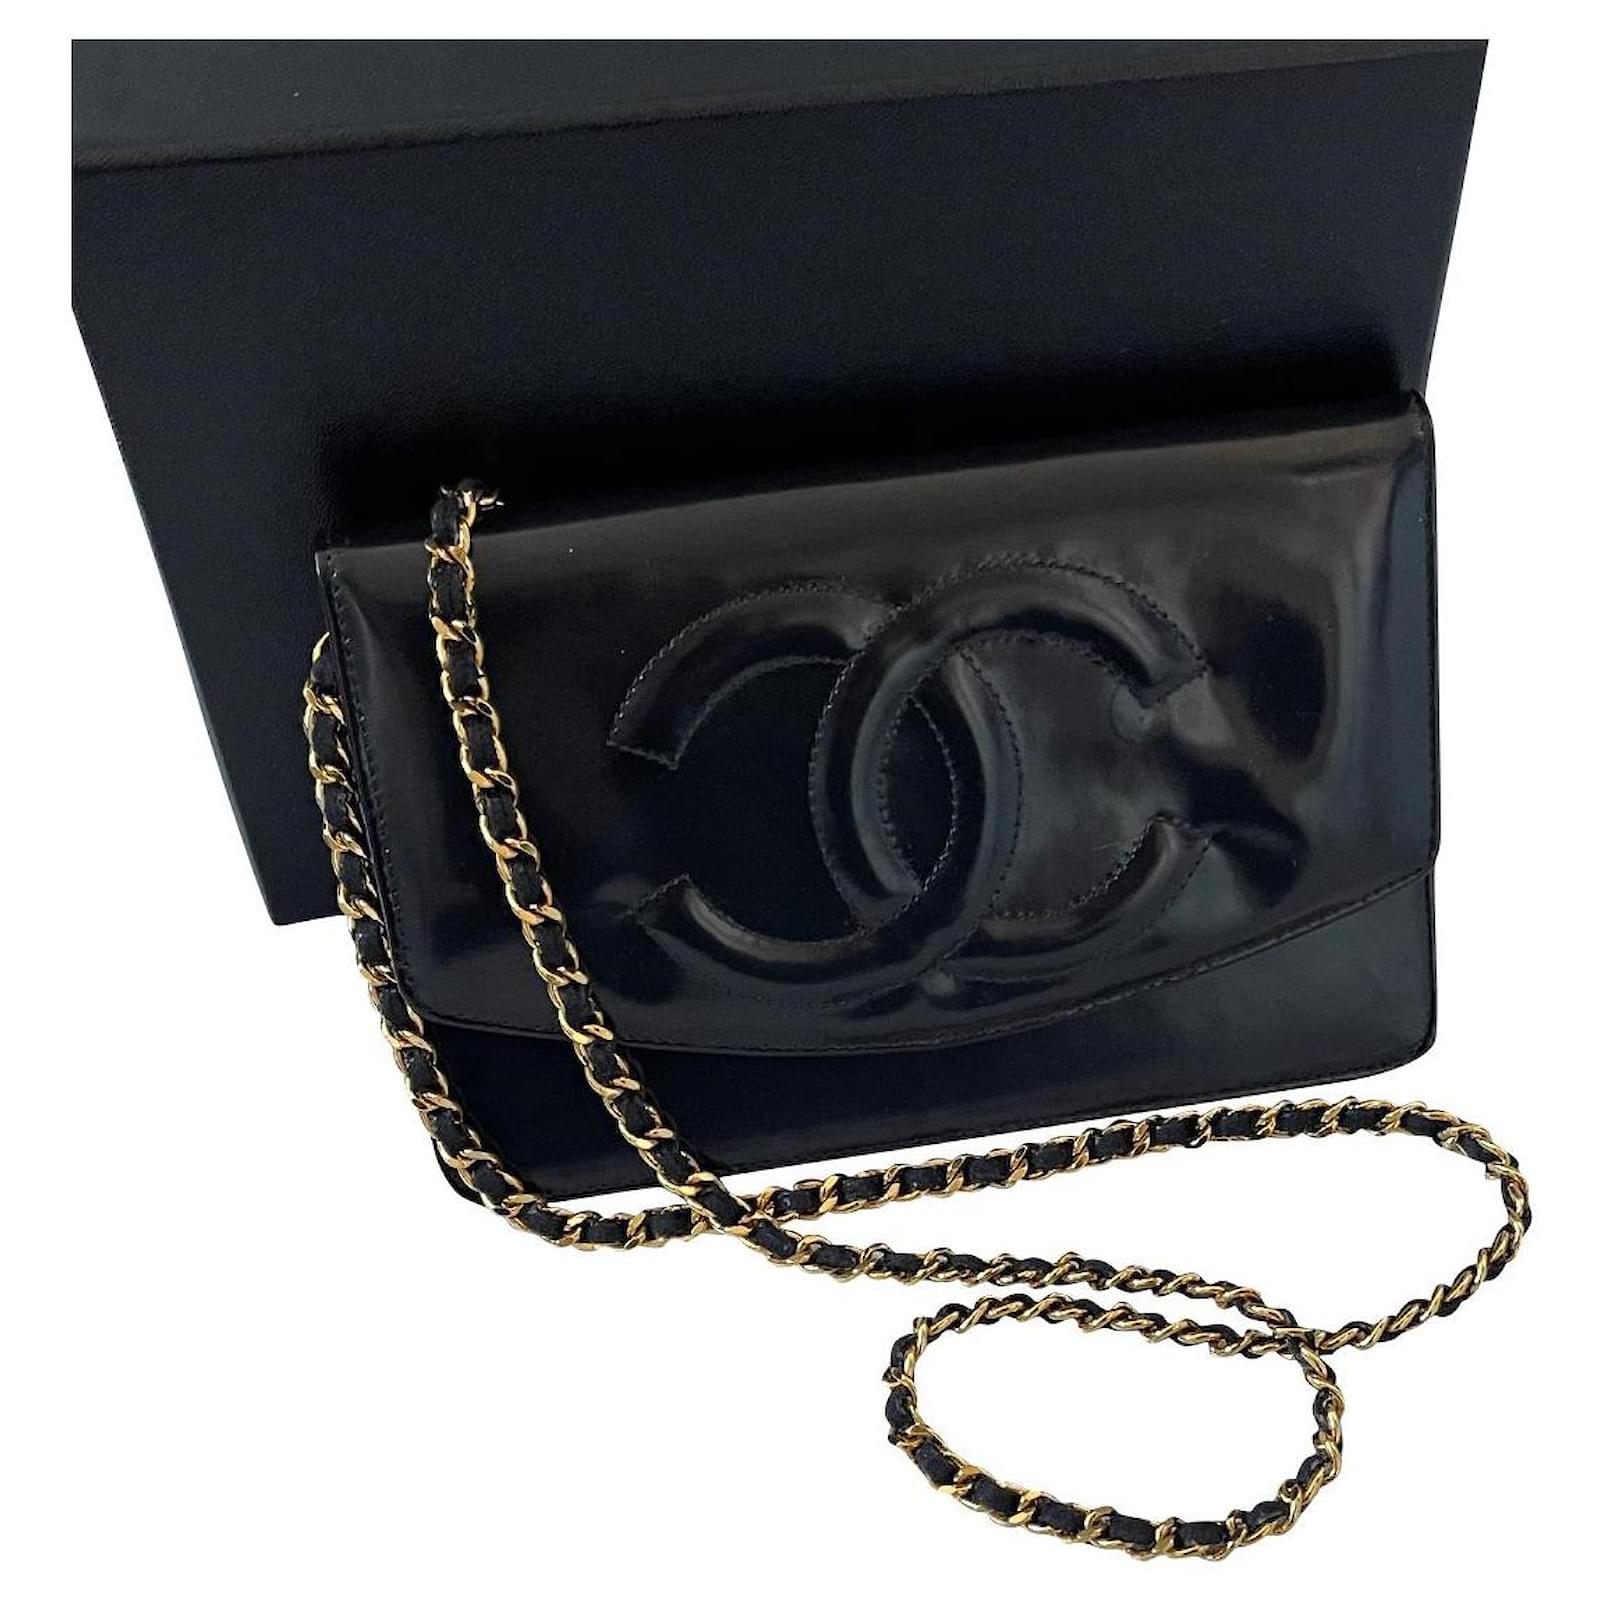 Wallet on chain patent leather crossbody bag Chanel Black in